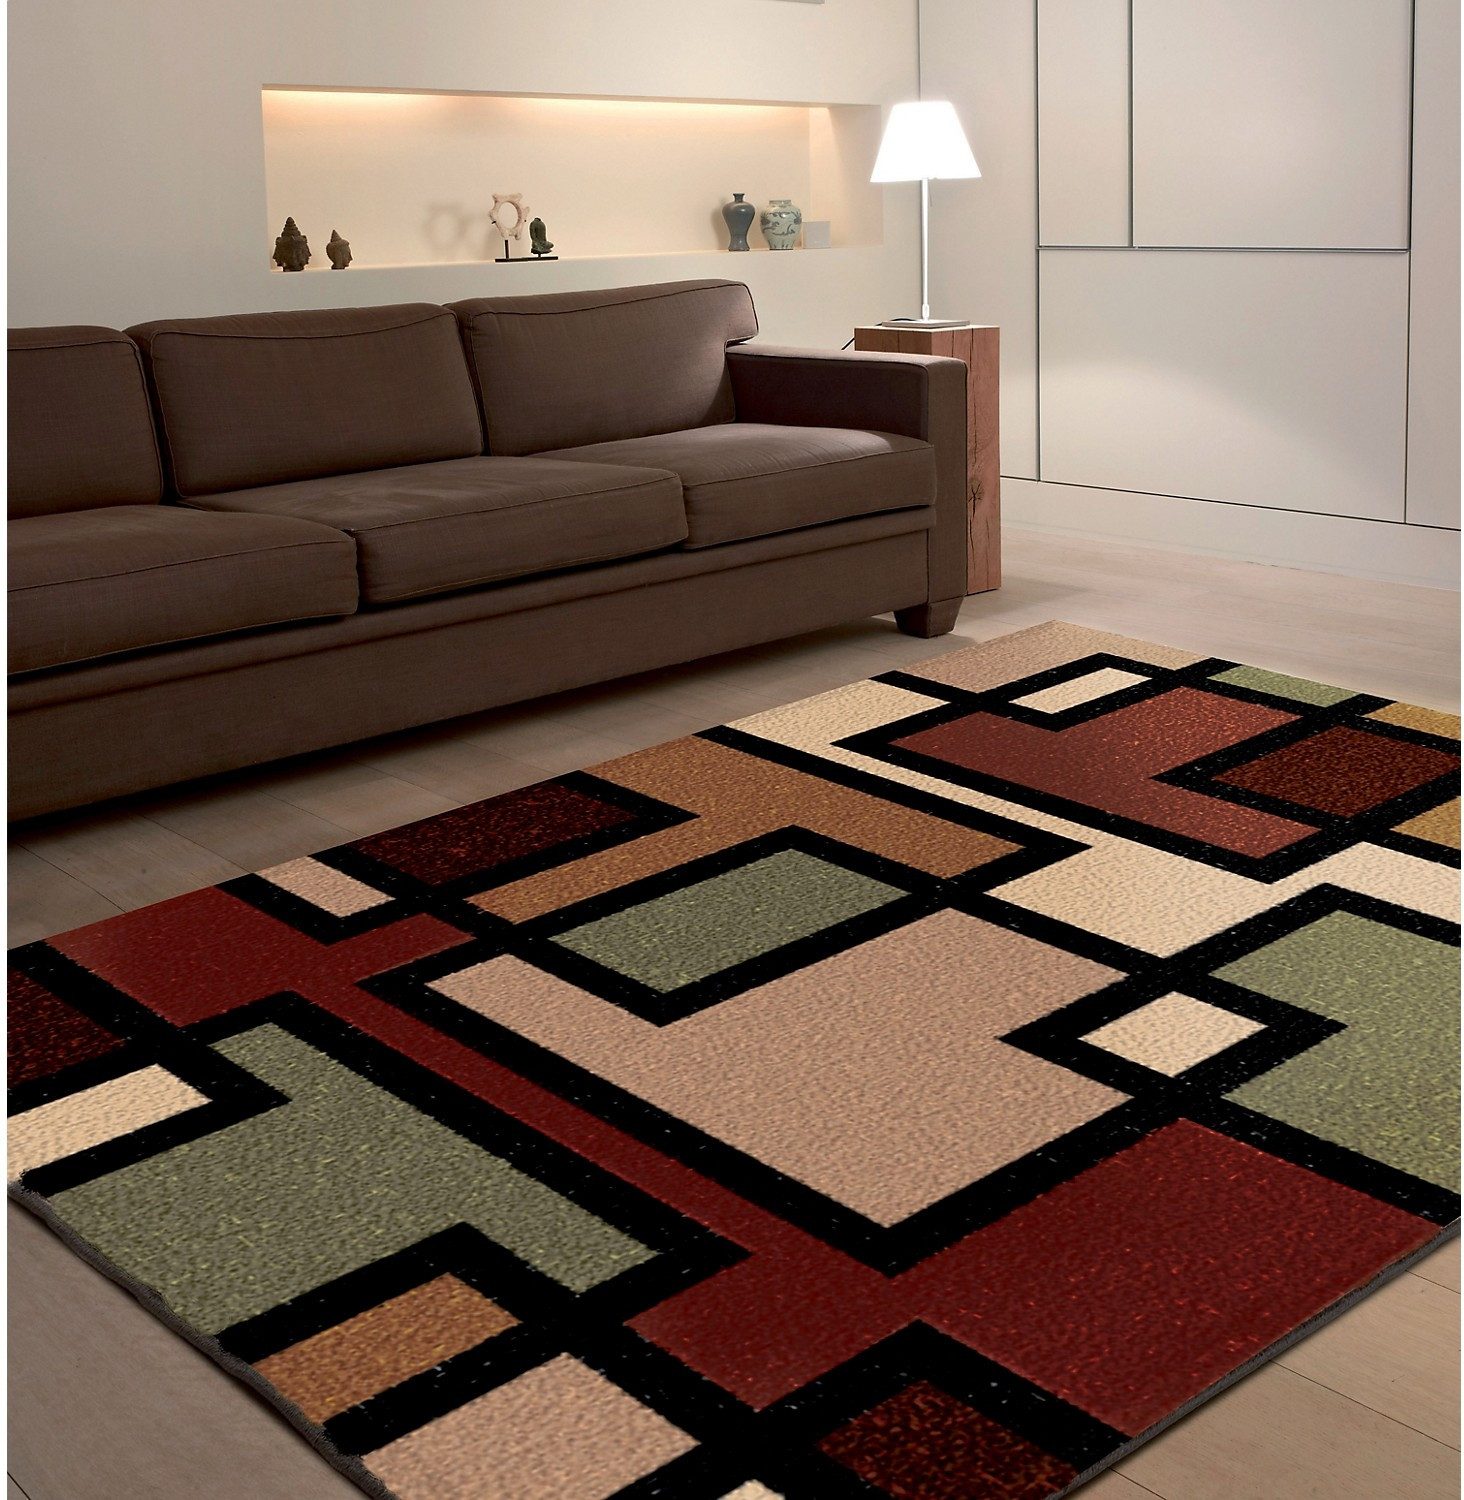 Center Rugs For Living Room
 Floor Surprising Tar Area Rugs 5x7 Design For Great